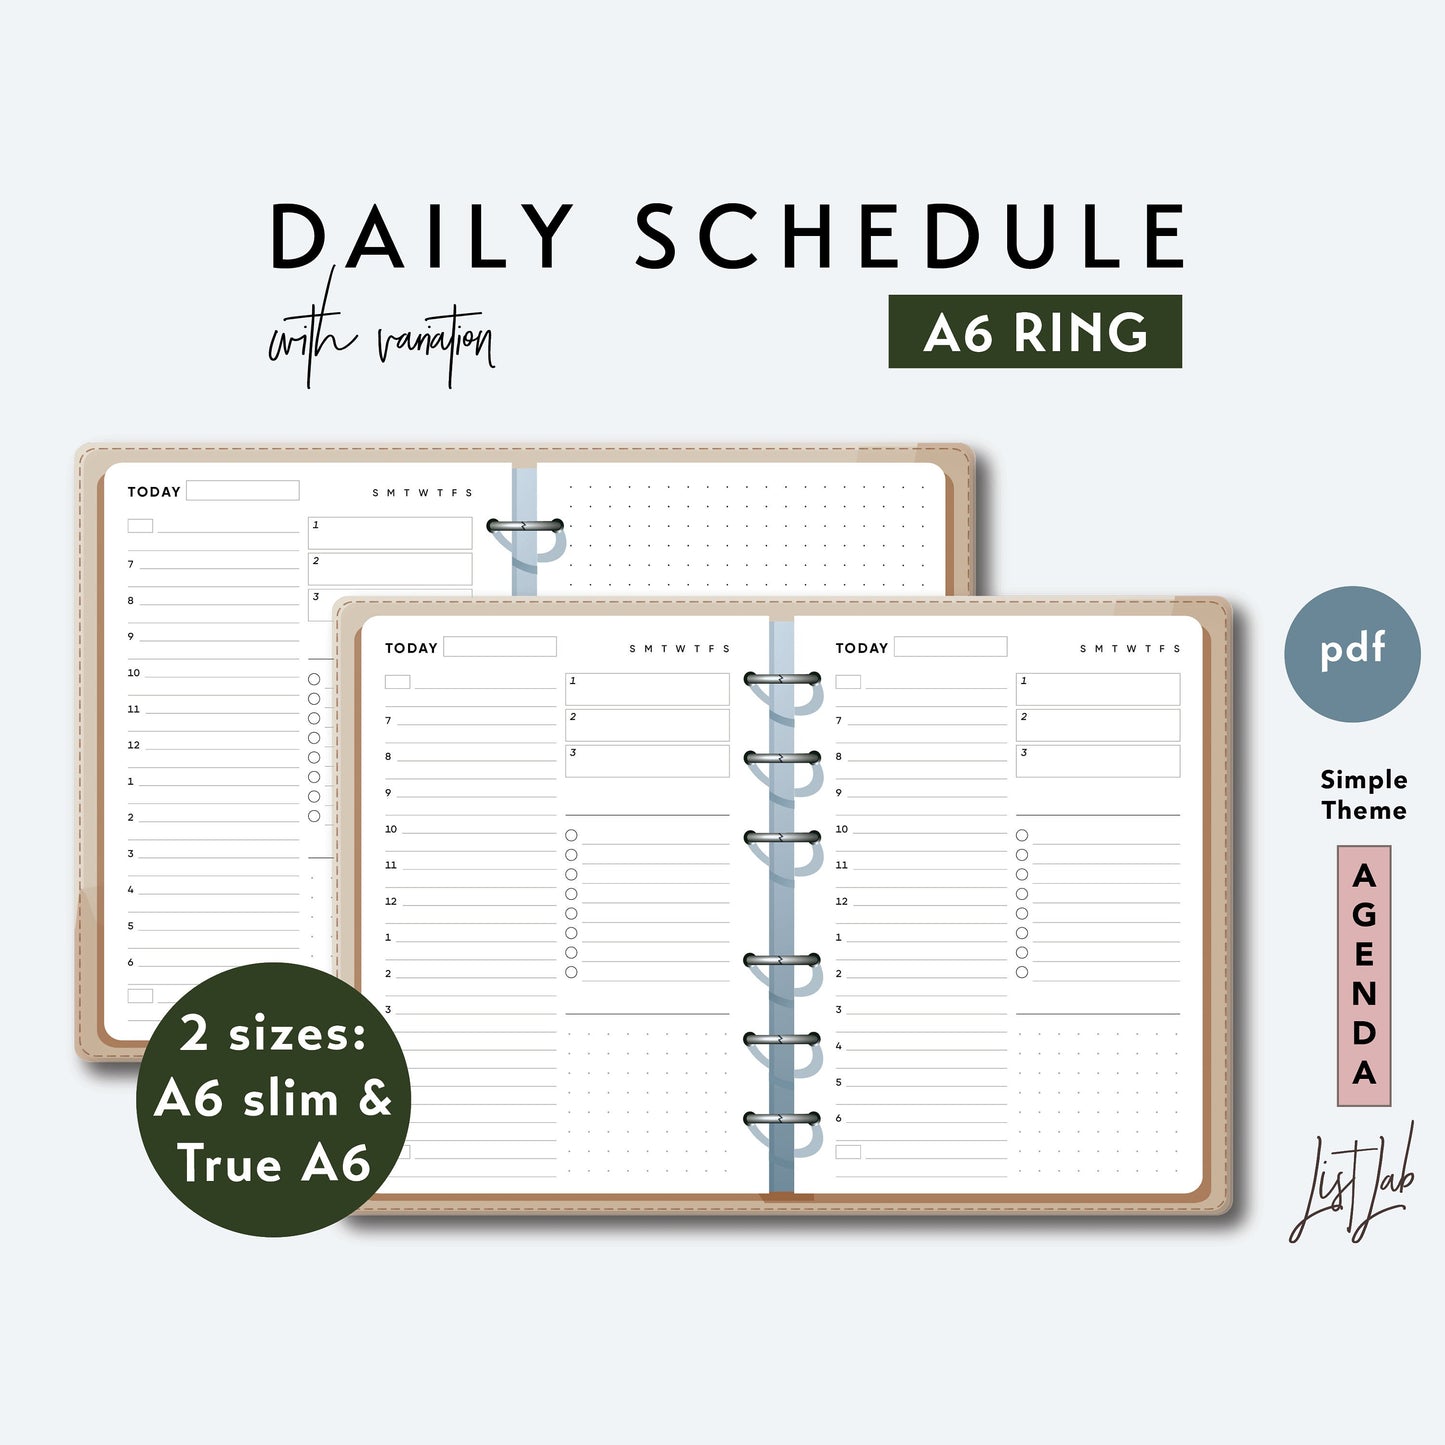 A6 Ring DAILY SCHEDULE Printable Set